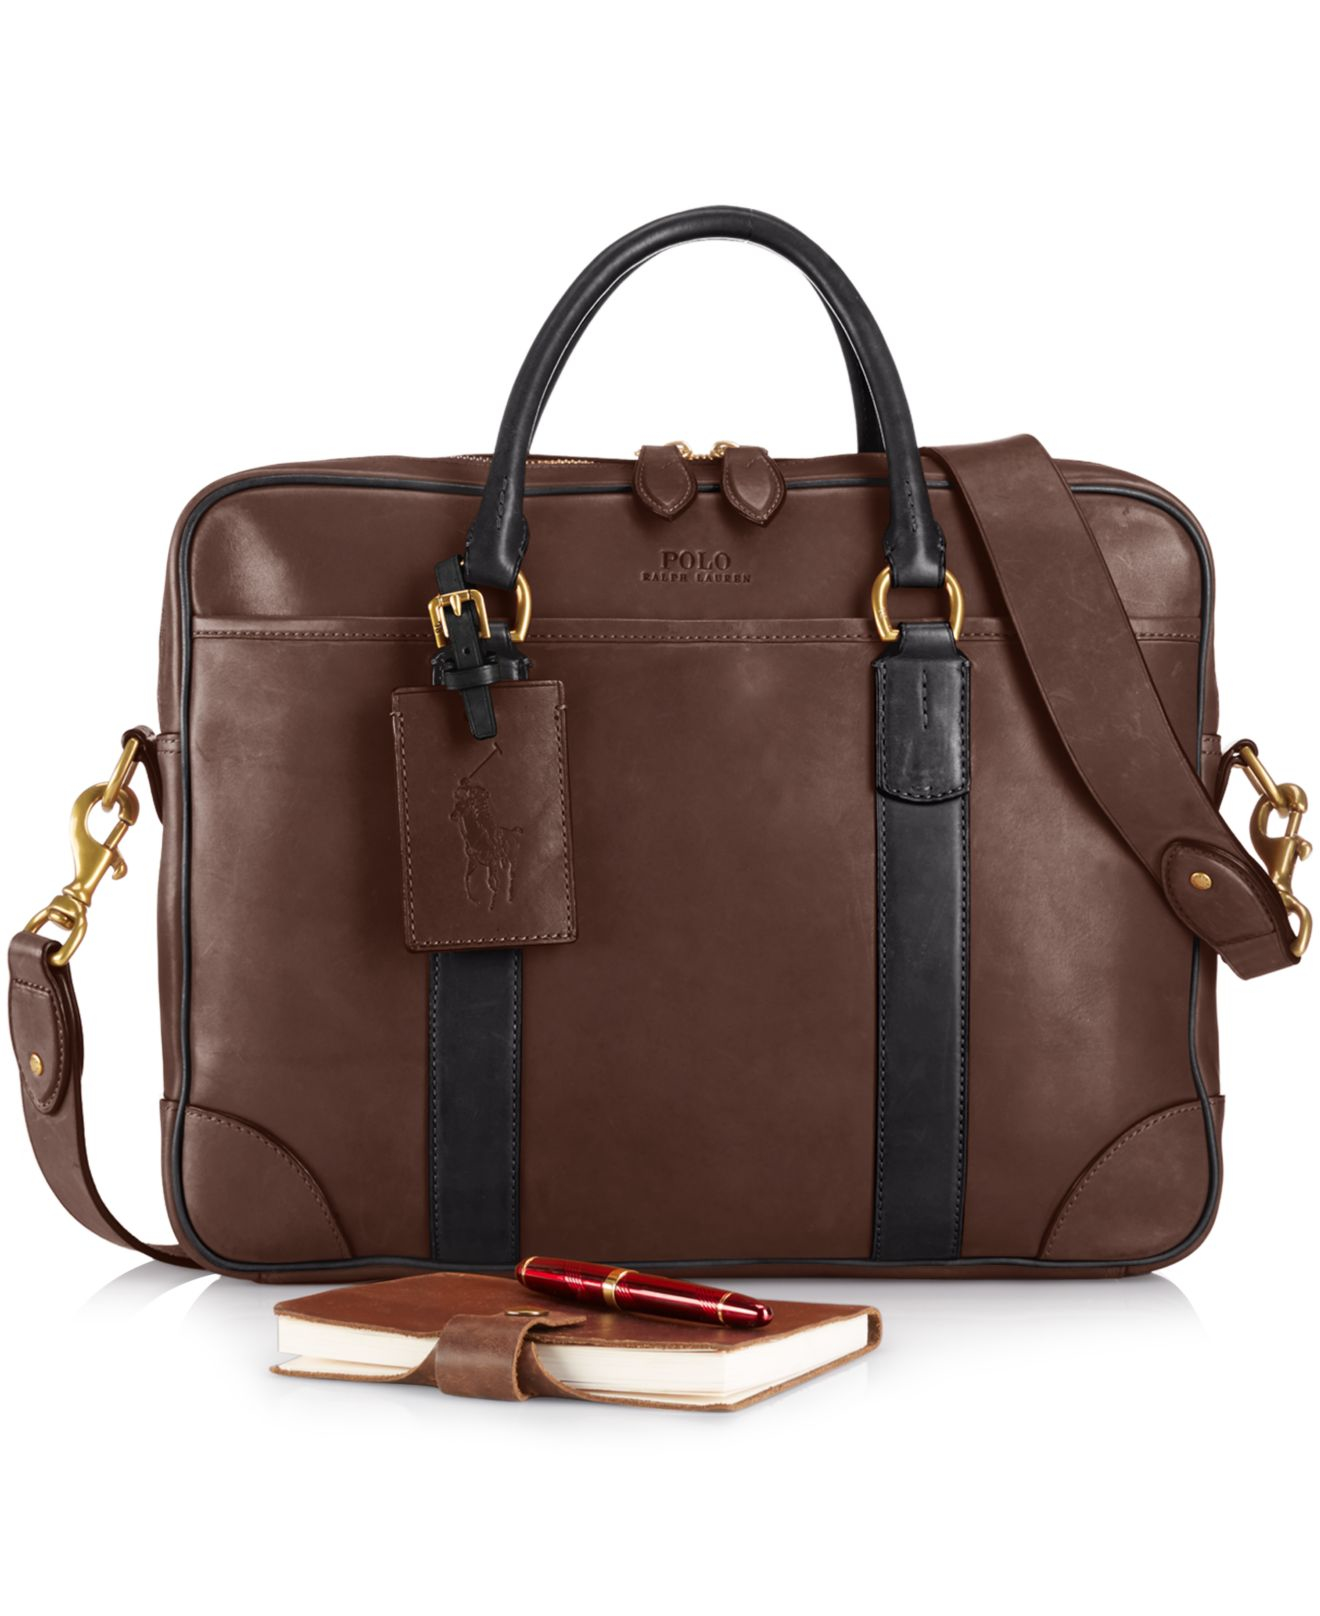 Polo Ralph Lauren Leather Commuter Bag in Brown for Men (Mahogany) | Lyst